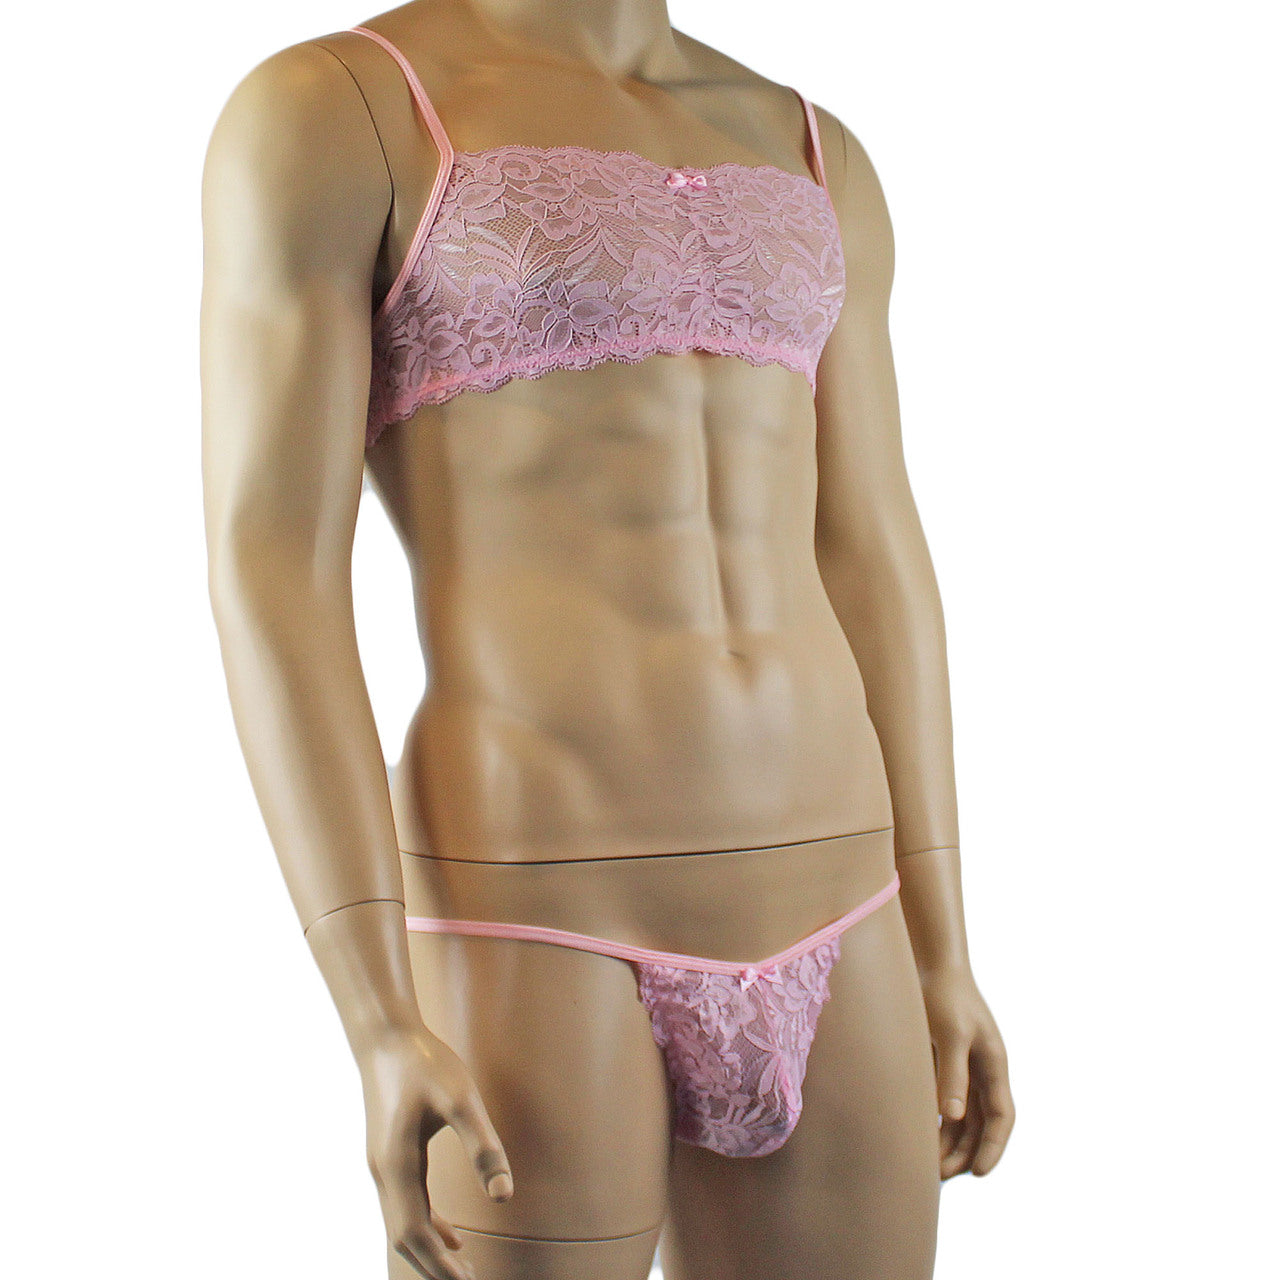 Mens Sexy Lace Bikini Brief, Male Panties (light pink plus other colours)